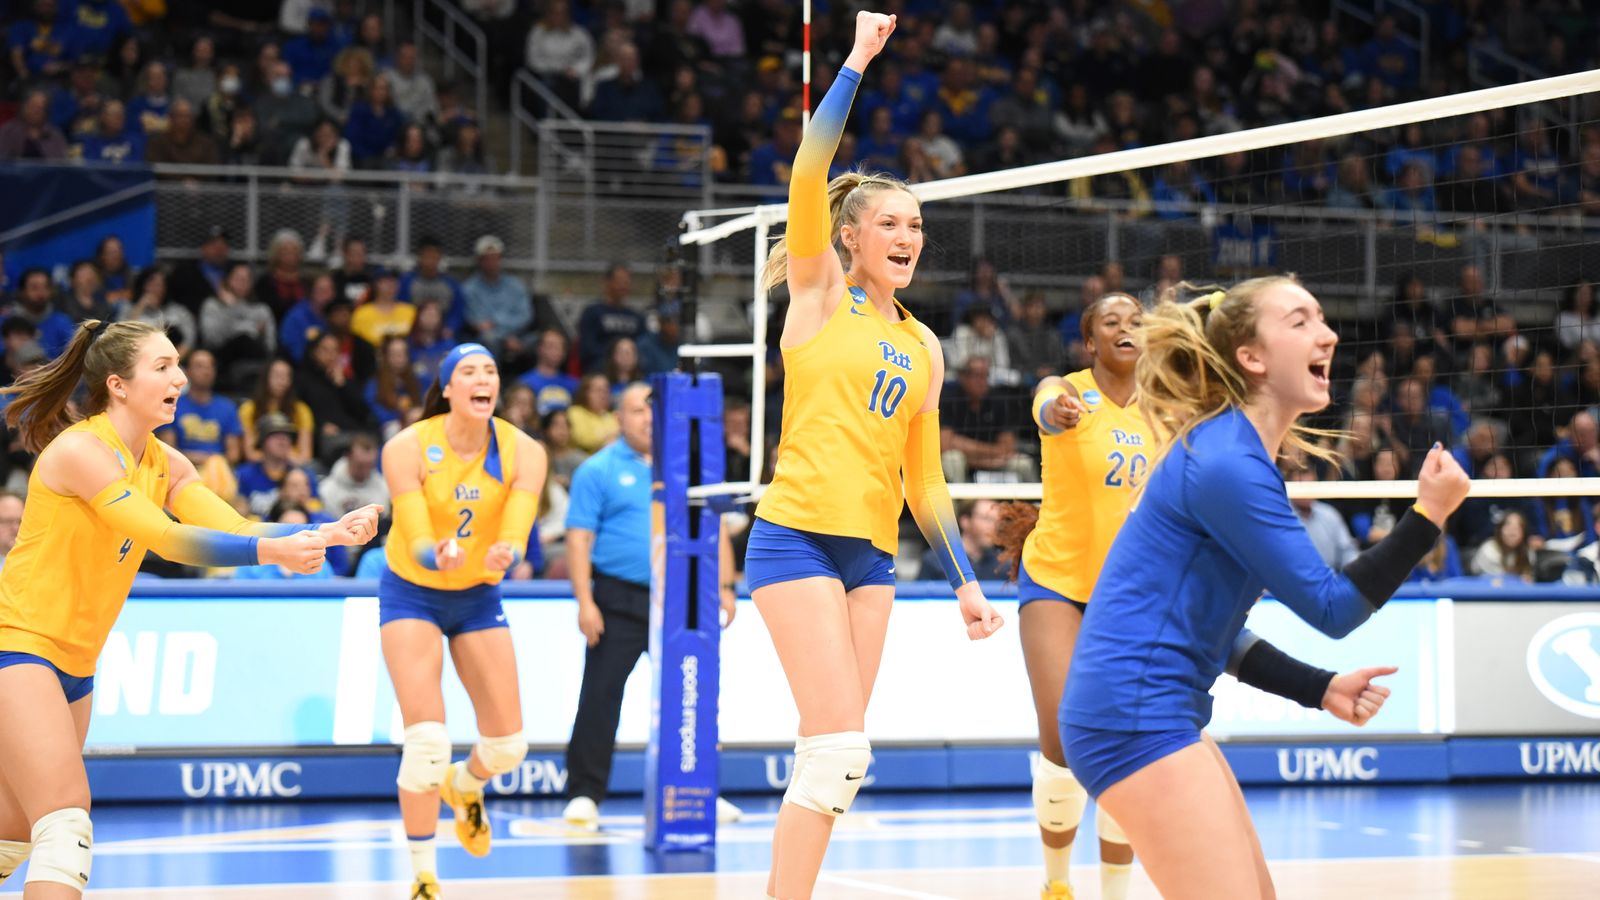 After convincing sweeps to open the NCAA Tournament, Pitt volleyball